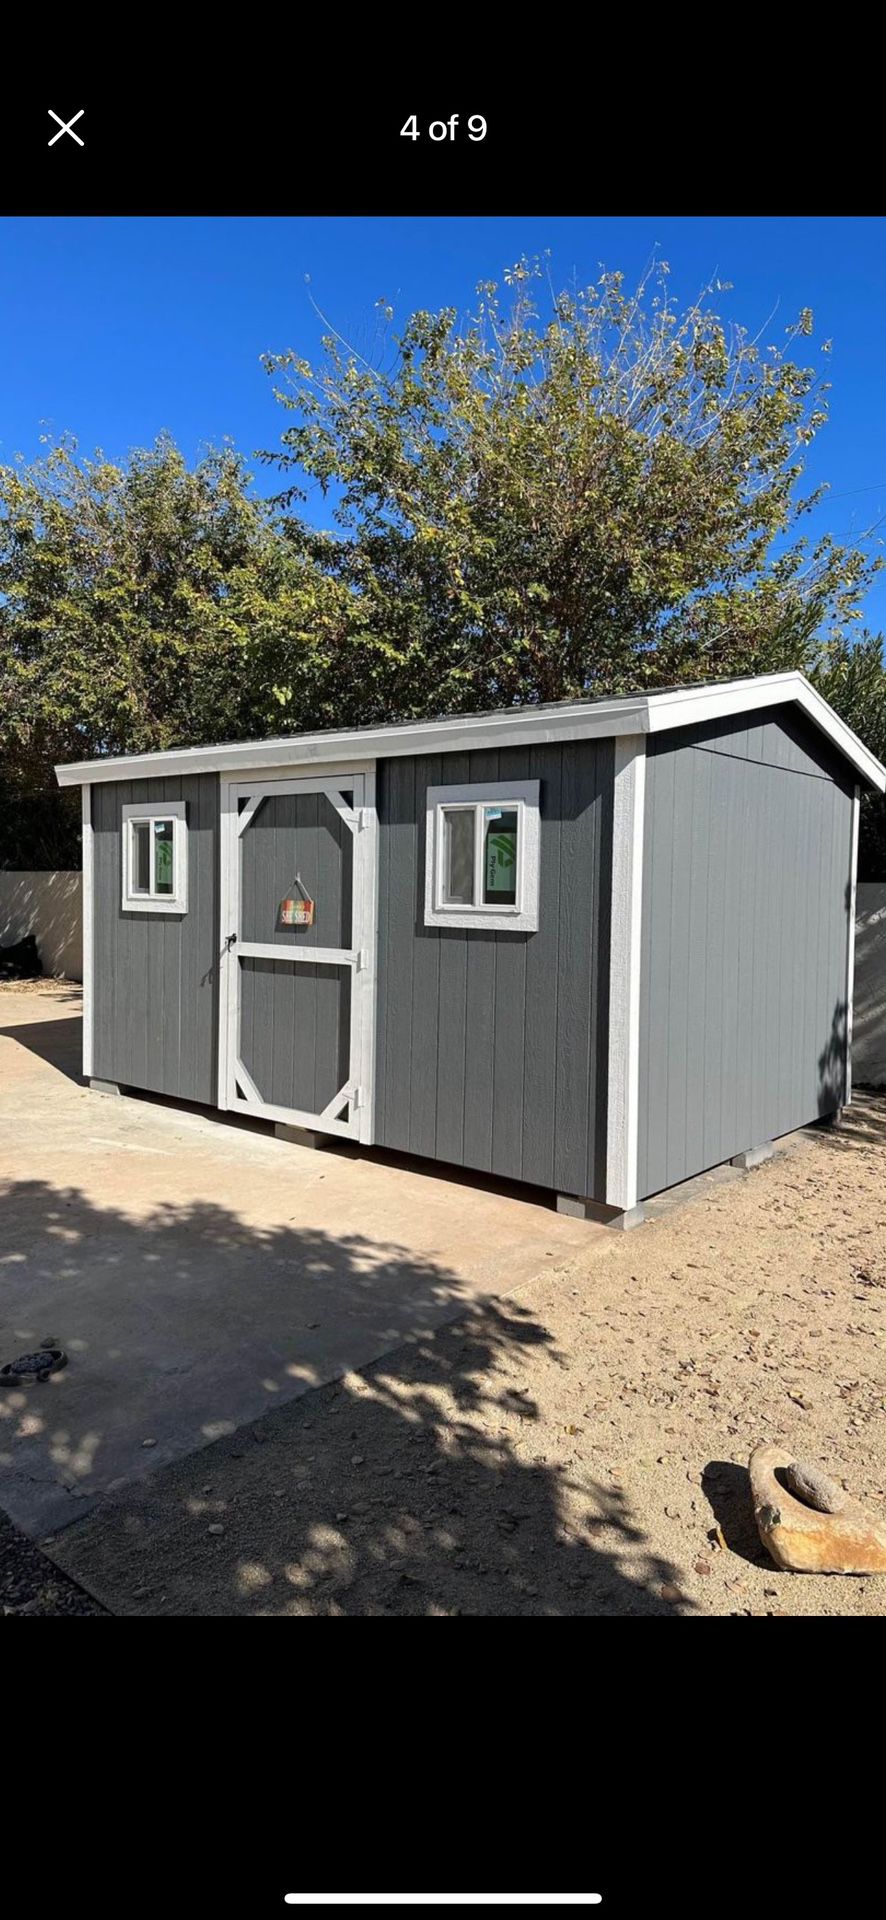 10x14 Gable Shed